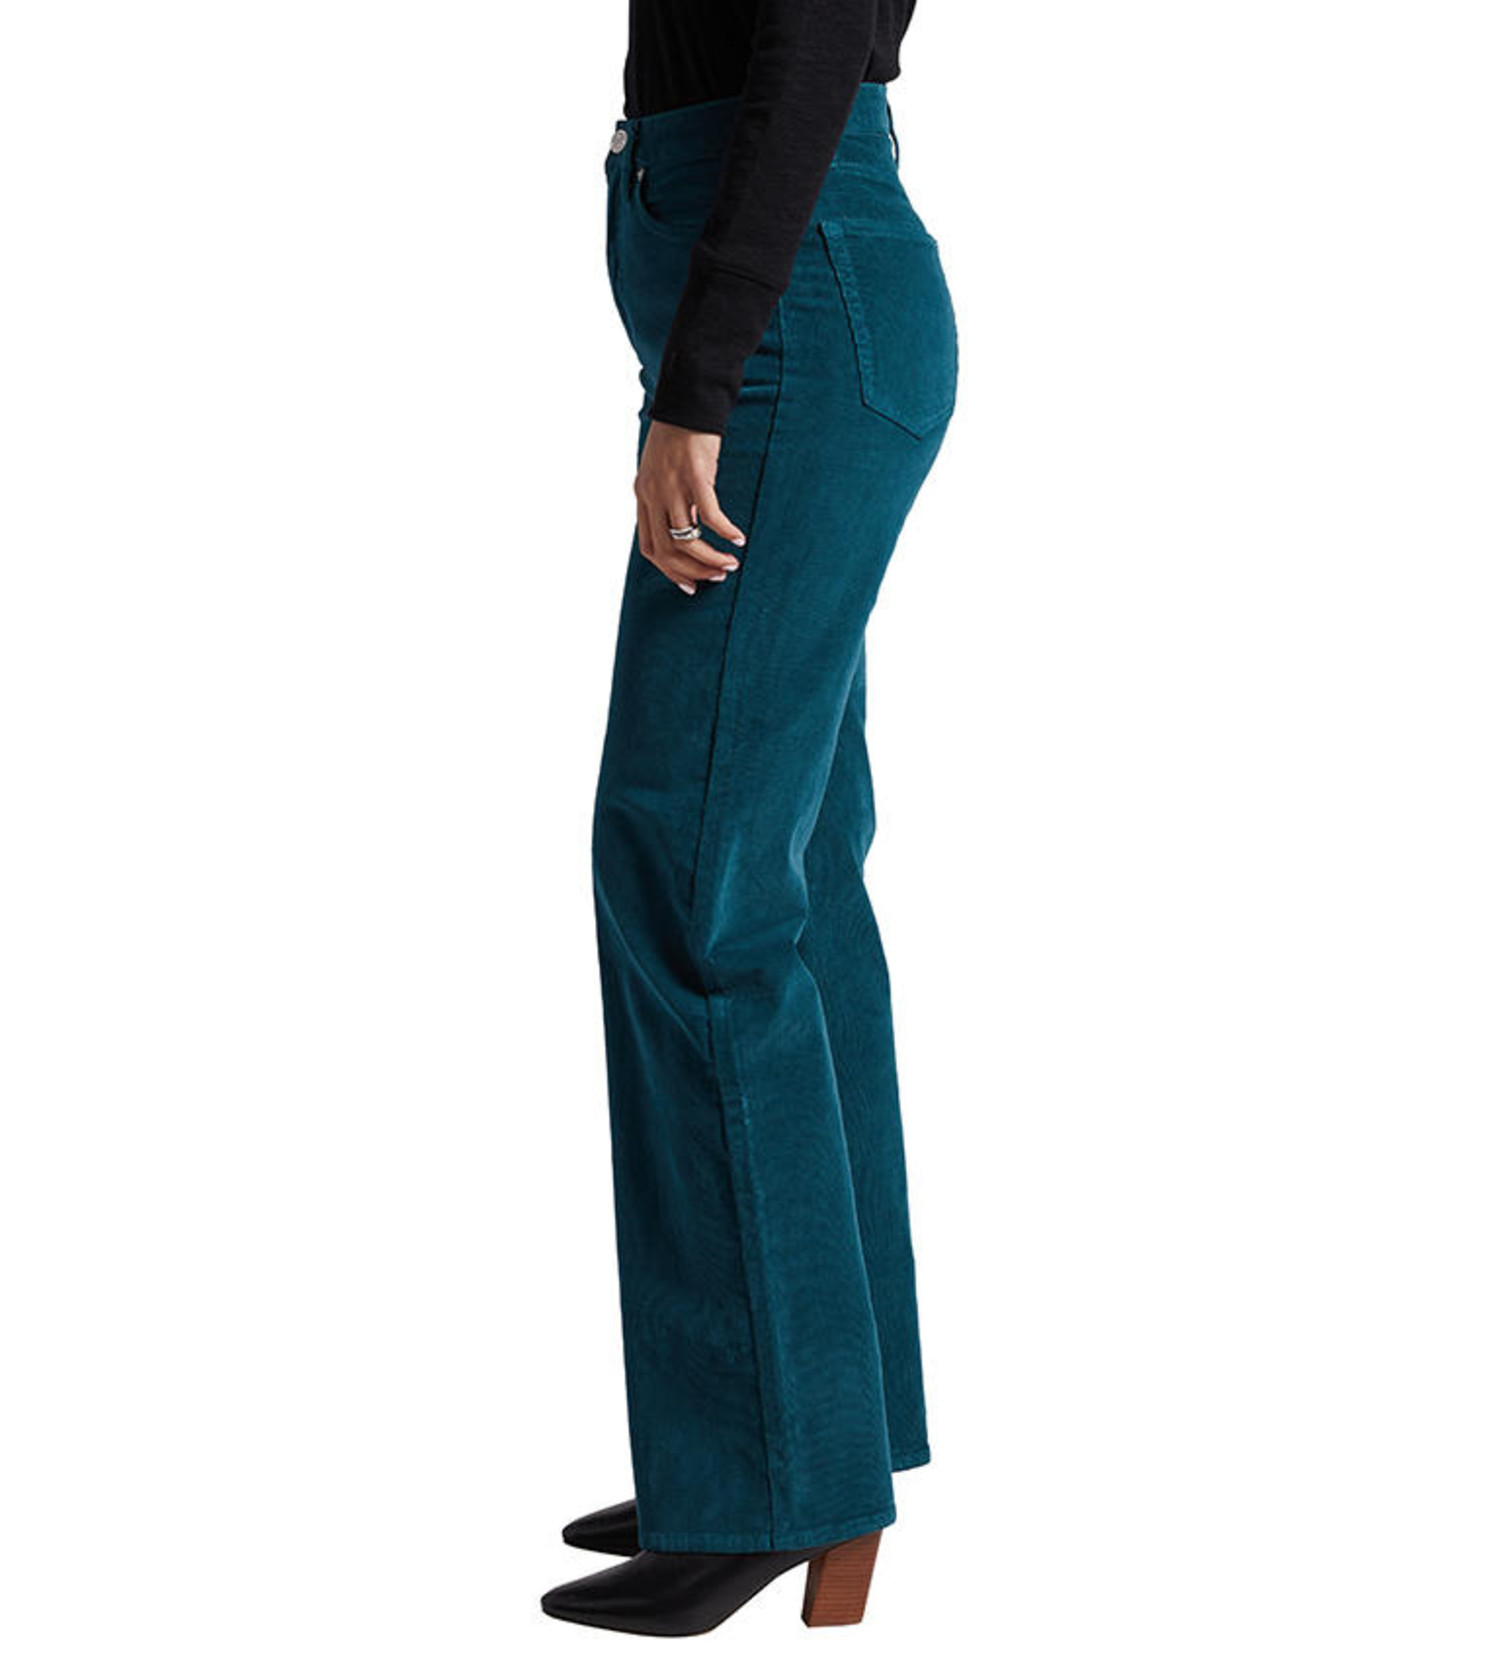 Highly Desirable Trouser Jean, Shop Now at Pseudio!